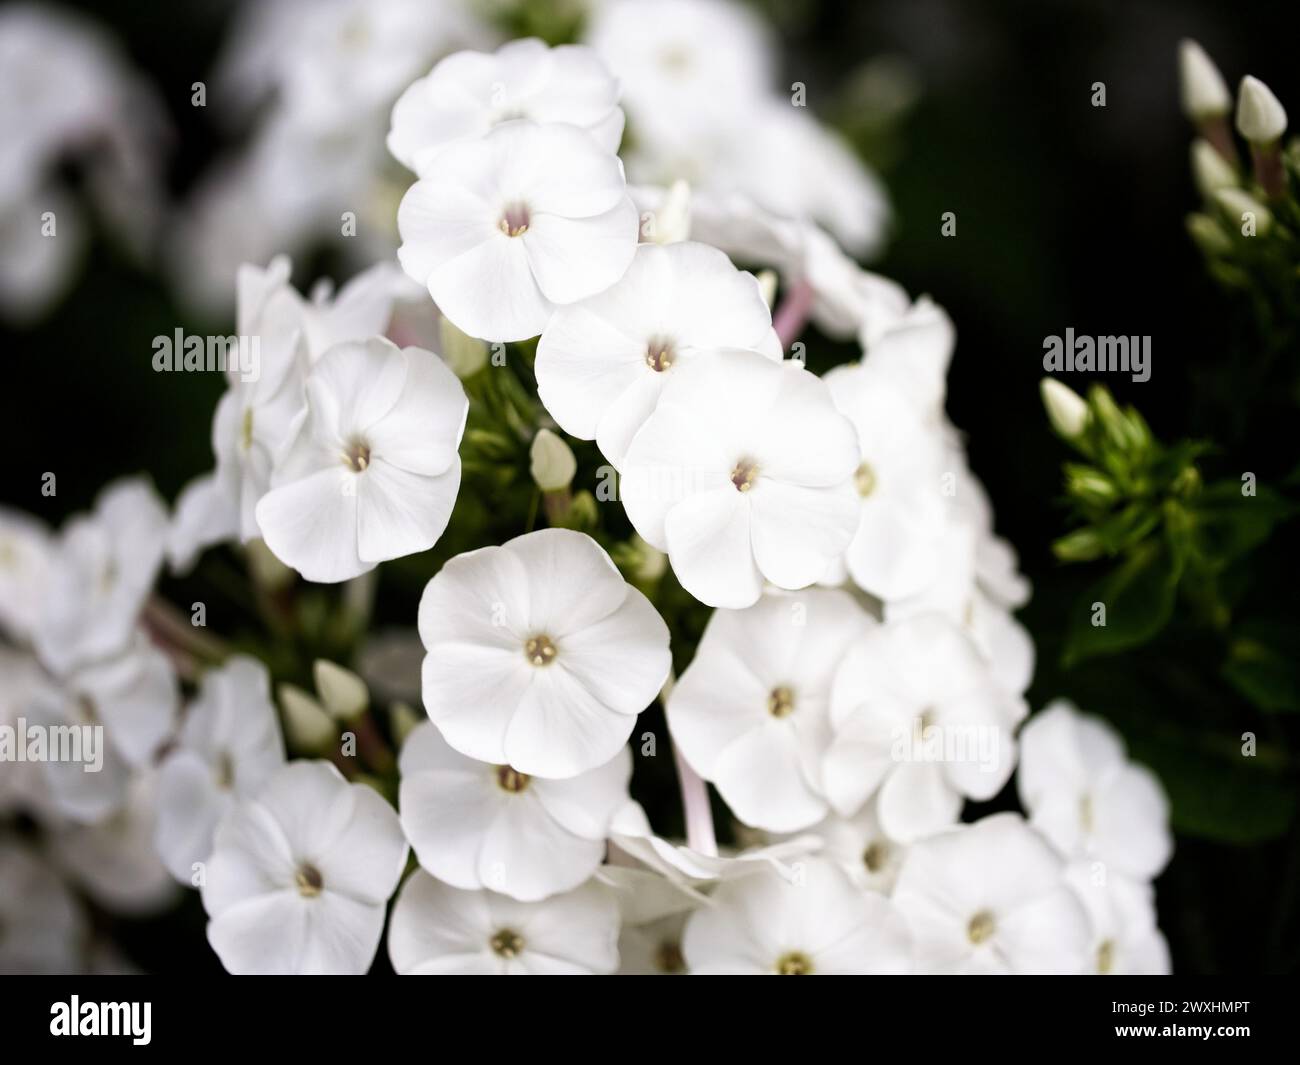 A cluster of pristine white flowers with delicate petals and prominent centers, surrounded by dark green foliage. Stock Photo